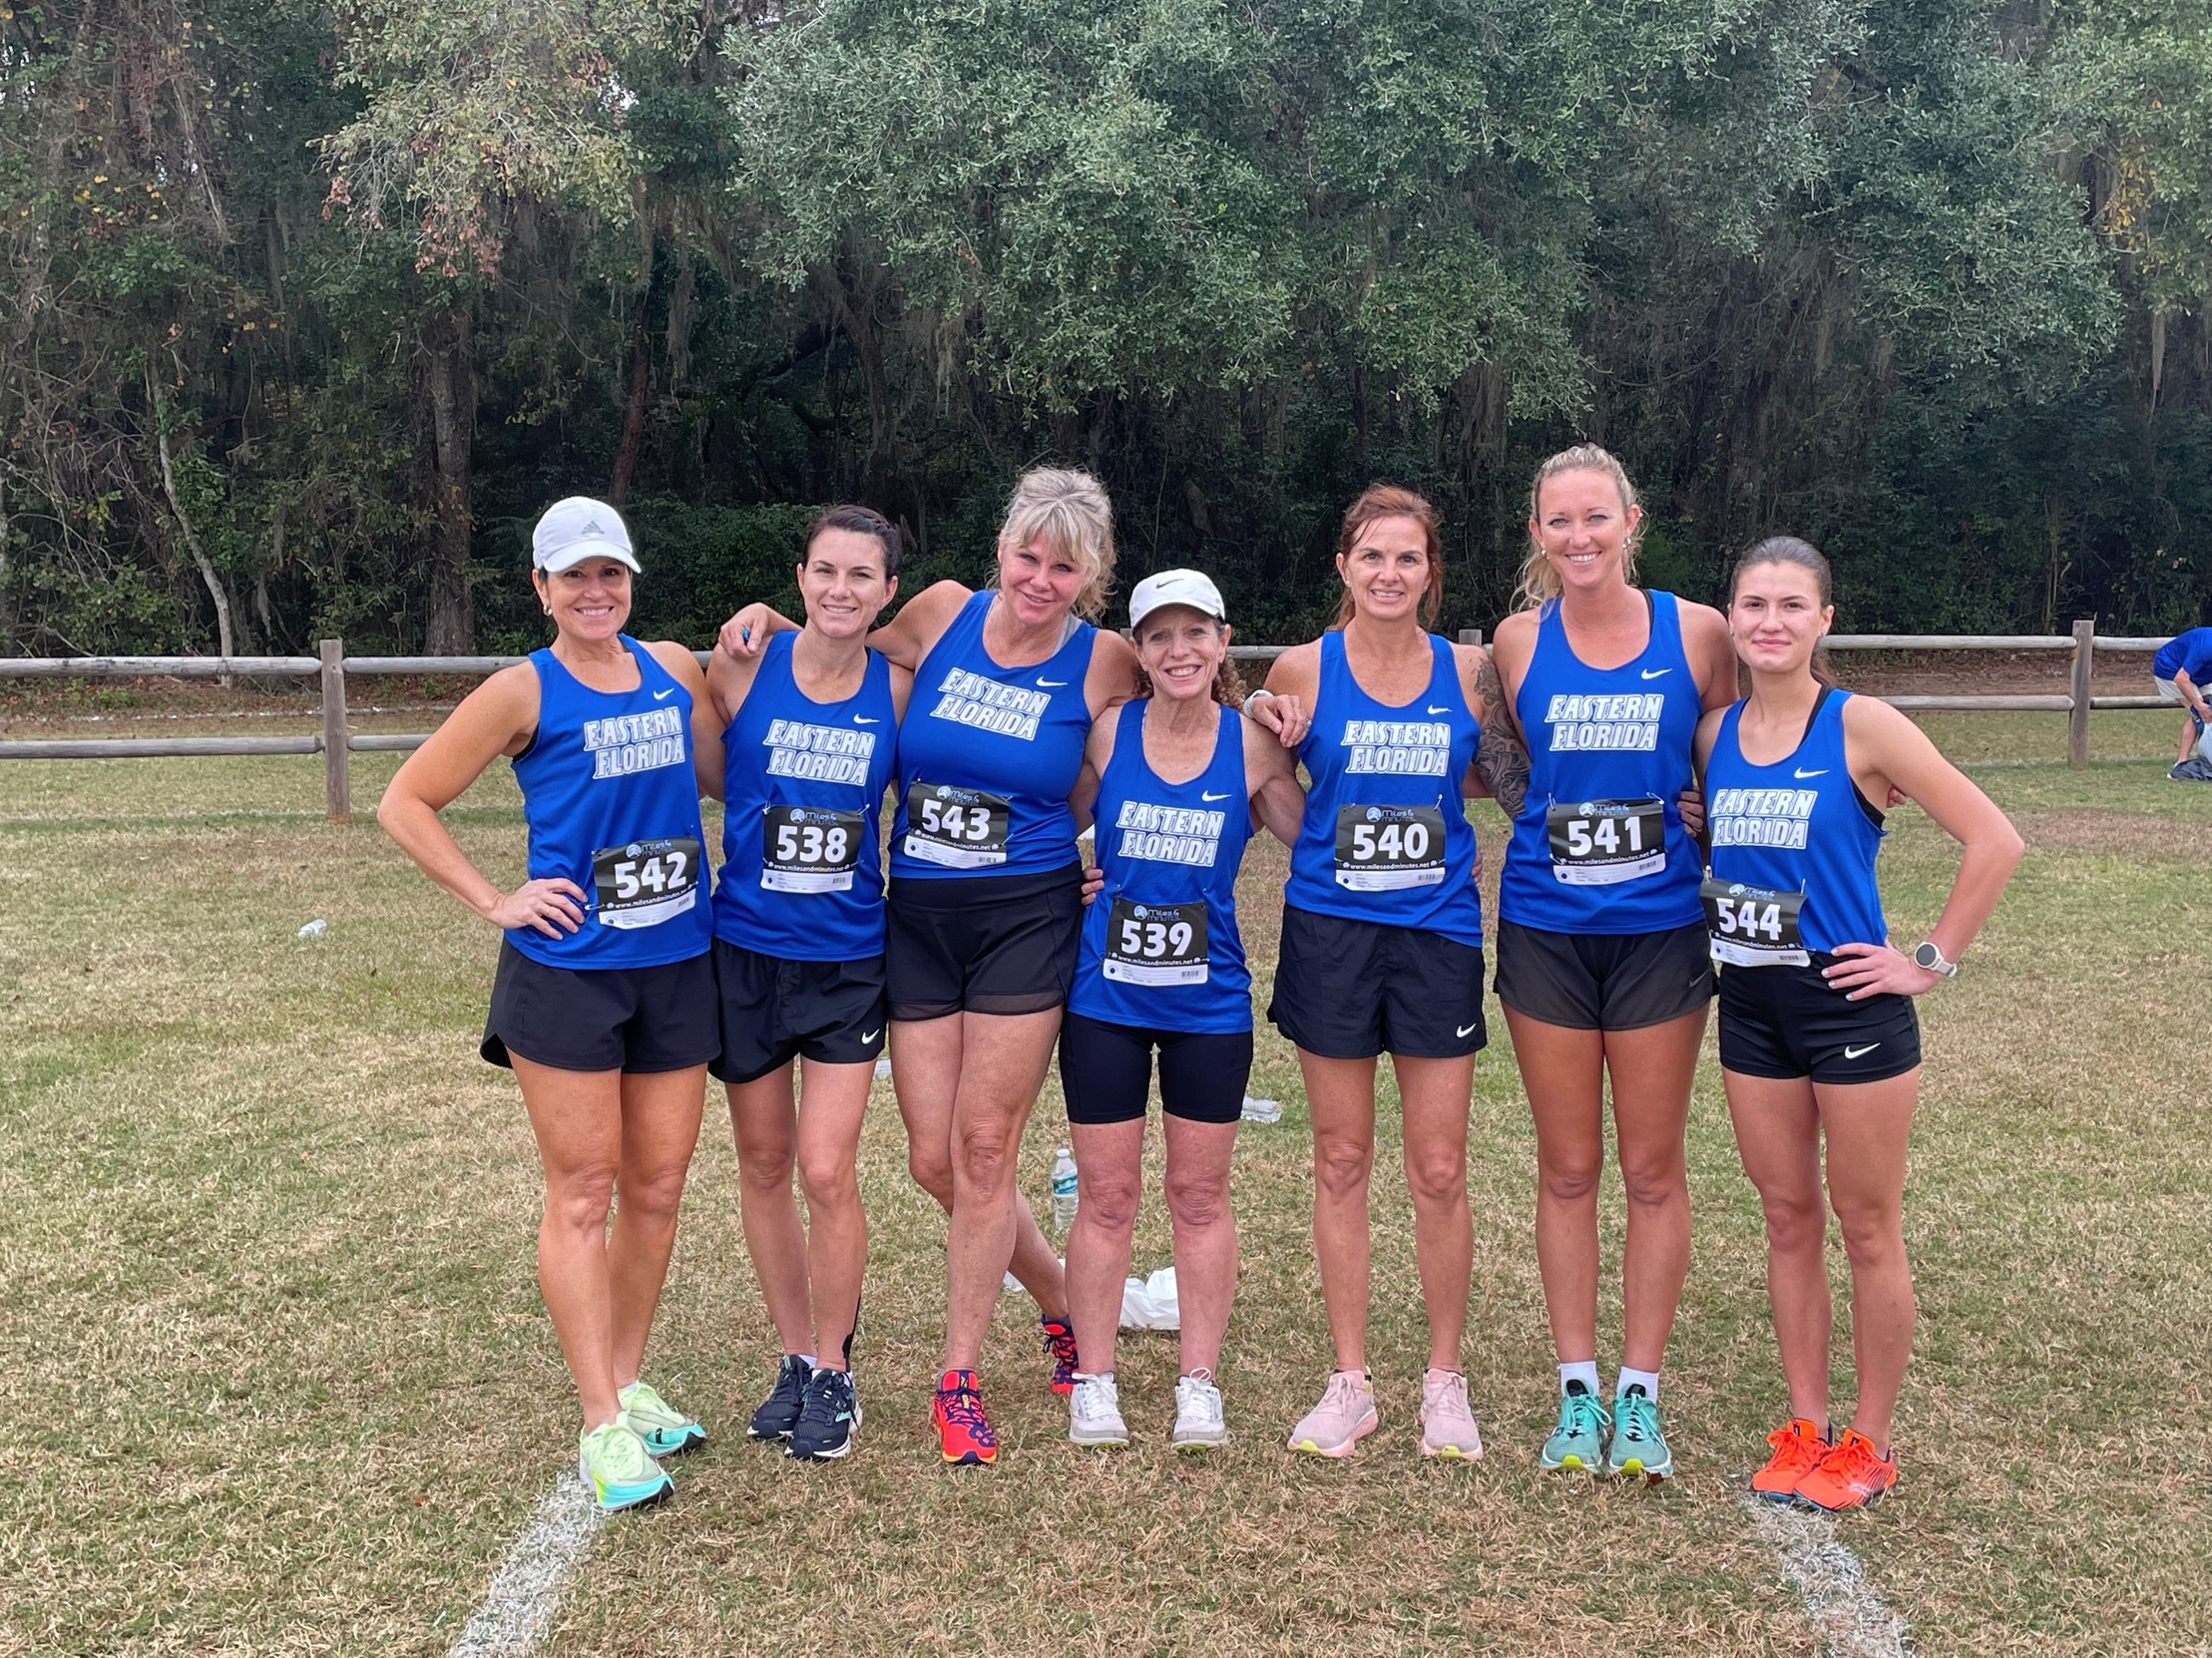 Women's cross country team to compete in first national tournament on Saturday